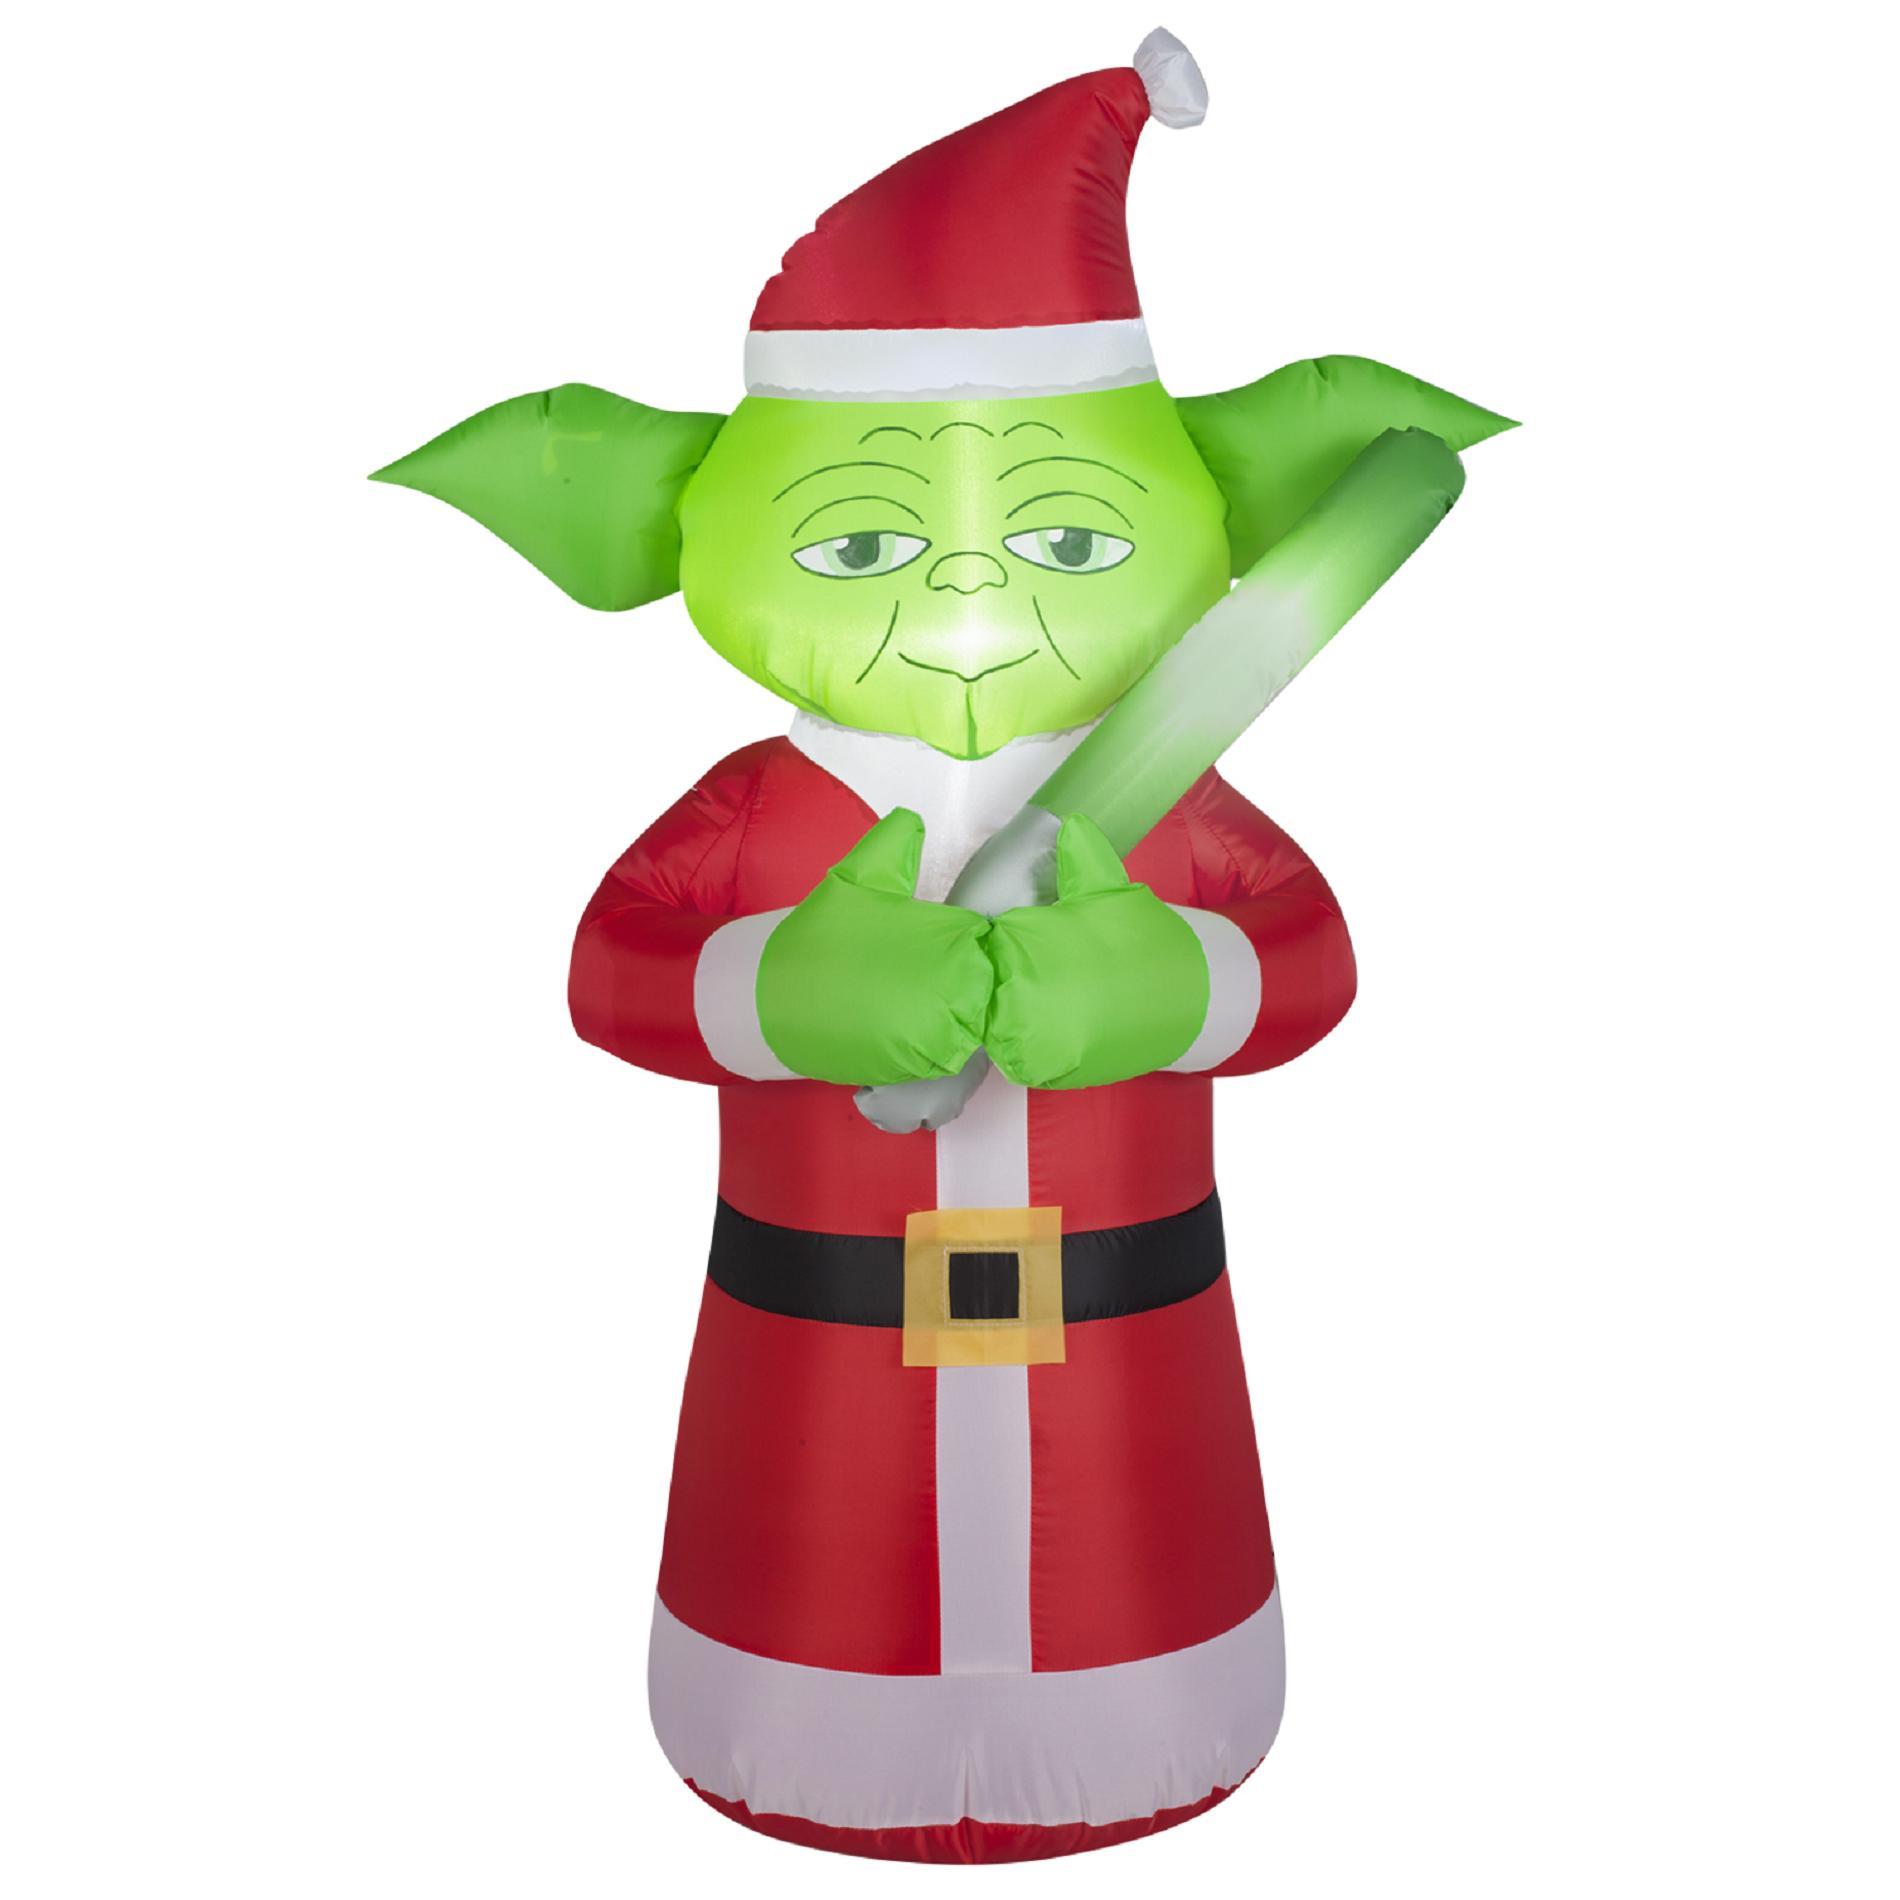 3.5' Inflatable Yoda: Celebrate Christmas the Star Wars Way from Kmart